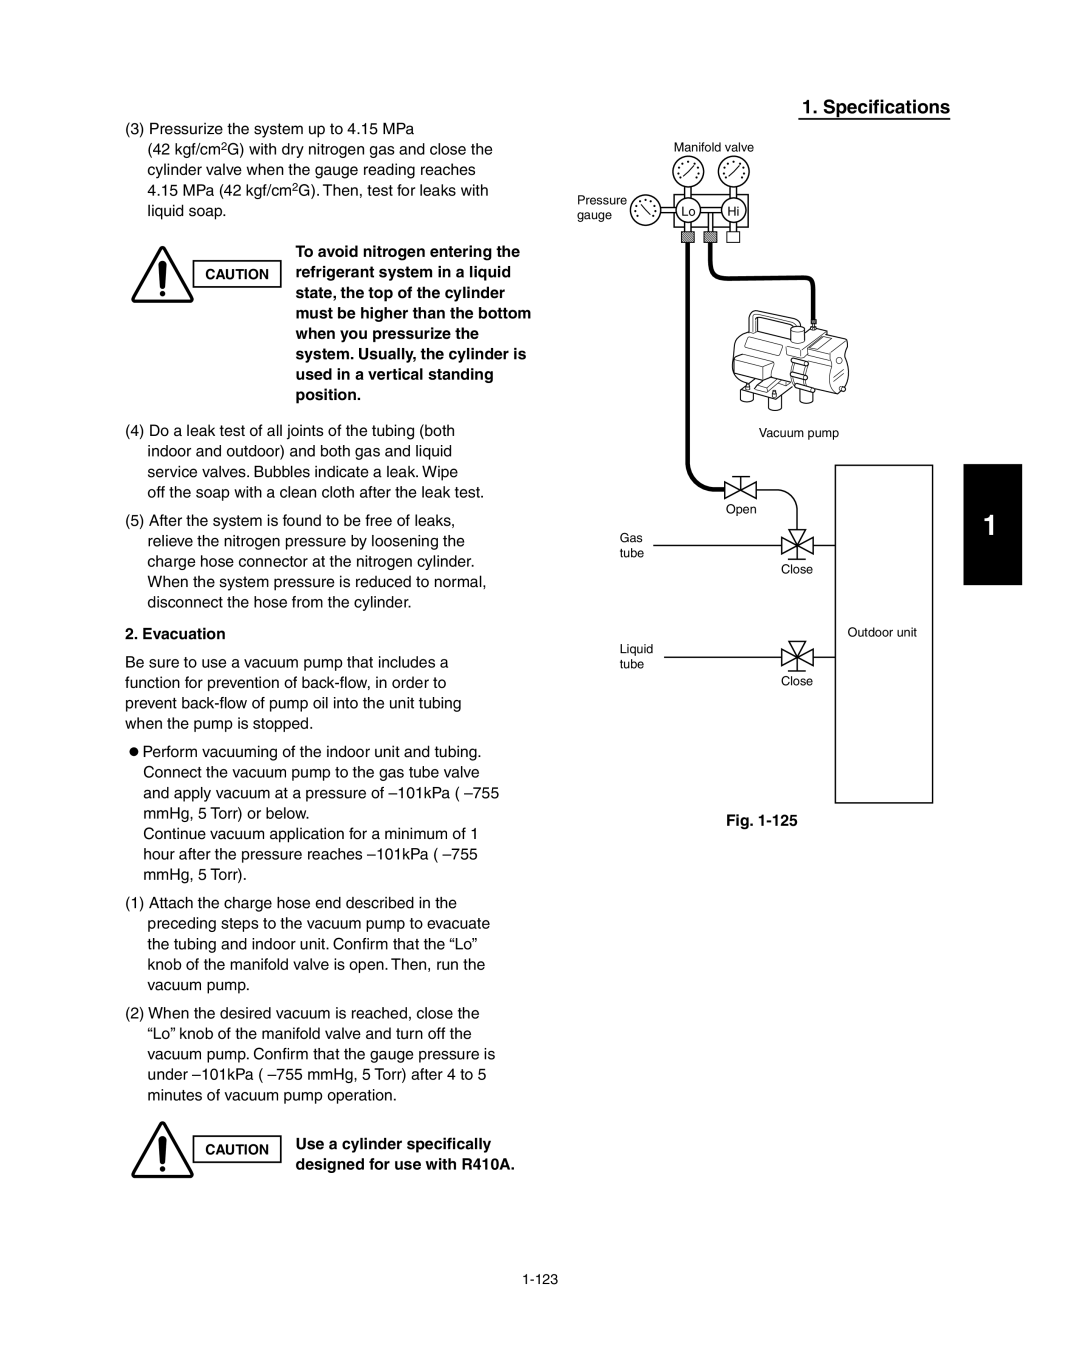 Panasonic service manual Specifications, Evacuation, Use a cylinder speciﬁcally, designed for use with R410A, Fig 